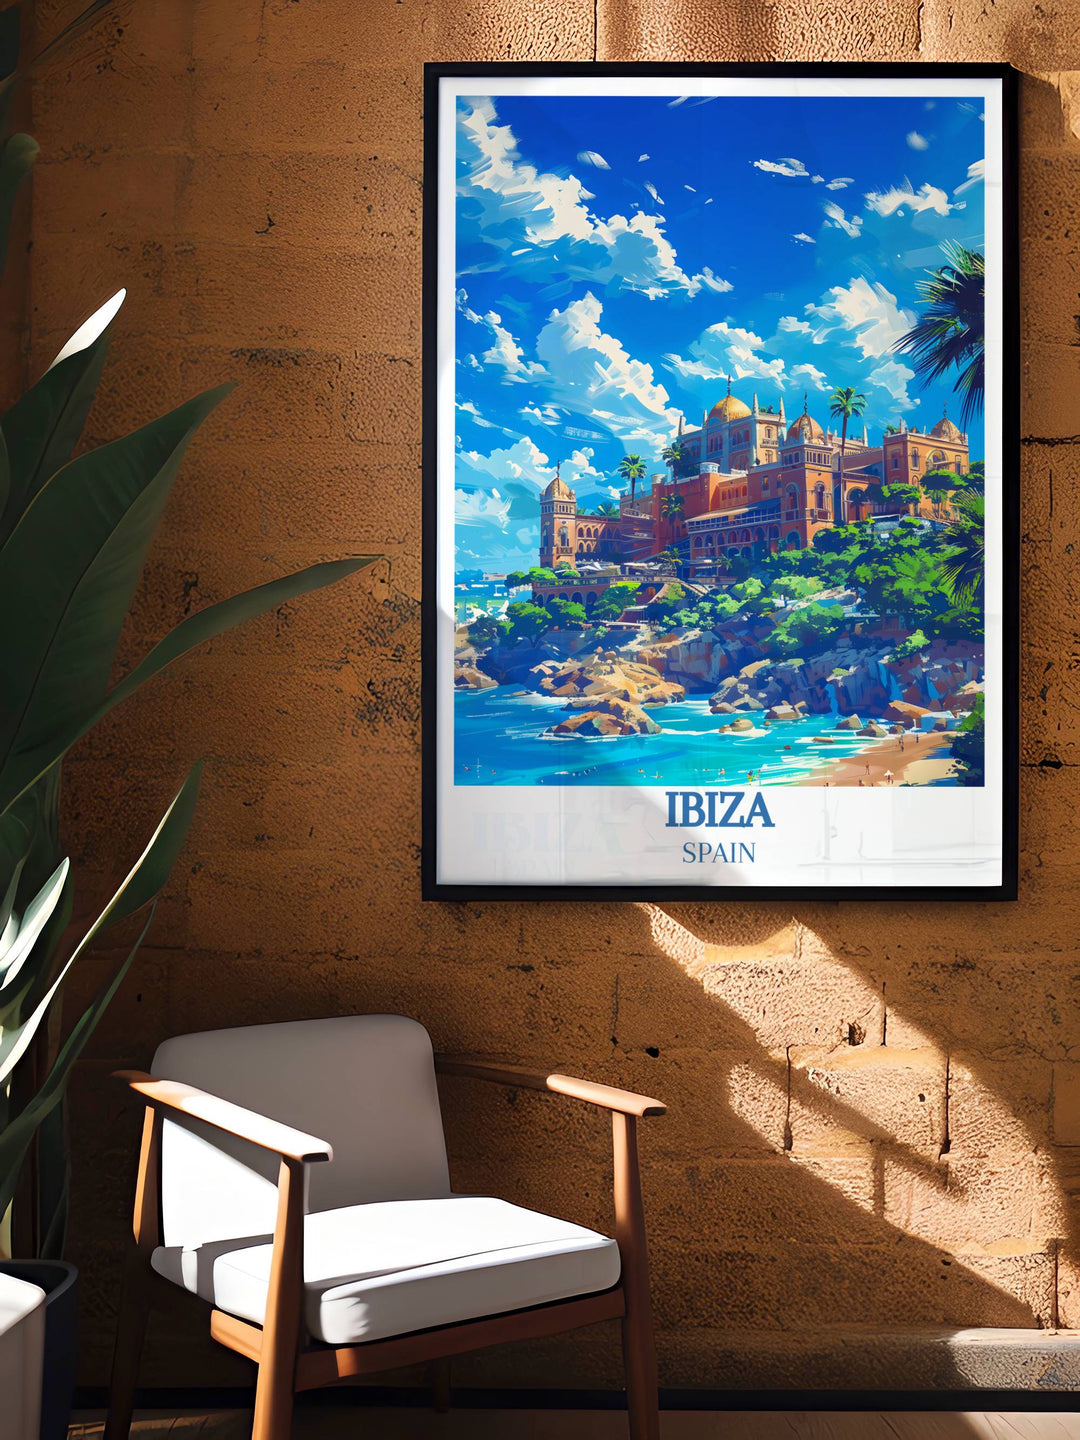 Dance Music Art poster showcasing the dynamic O Beach Day Club and the serene Cala d Hort Beach perfect for adding a touch of Ibizas lively nightlife and peaceful beach vibes to your wall art collection